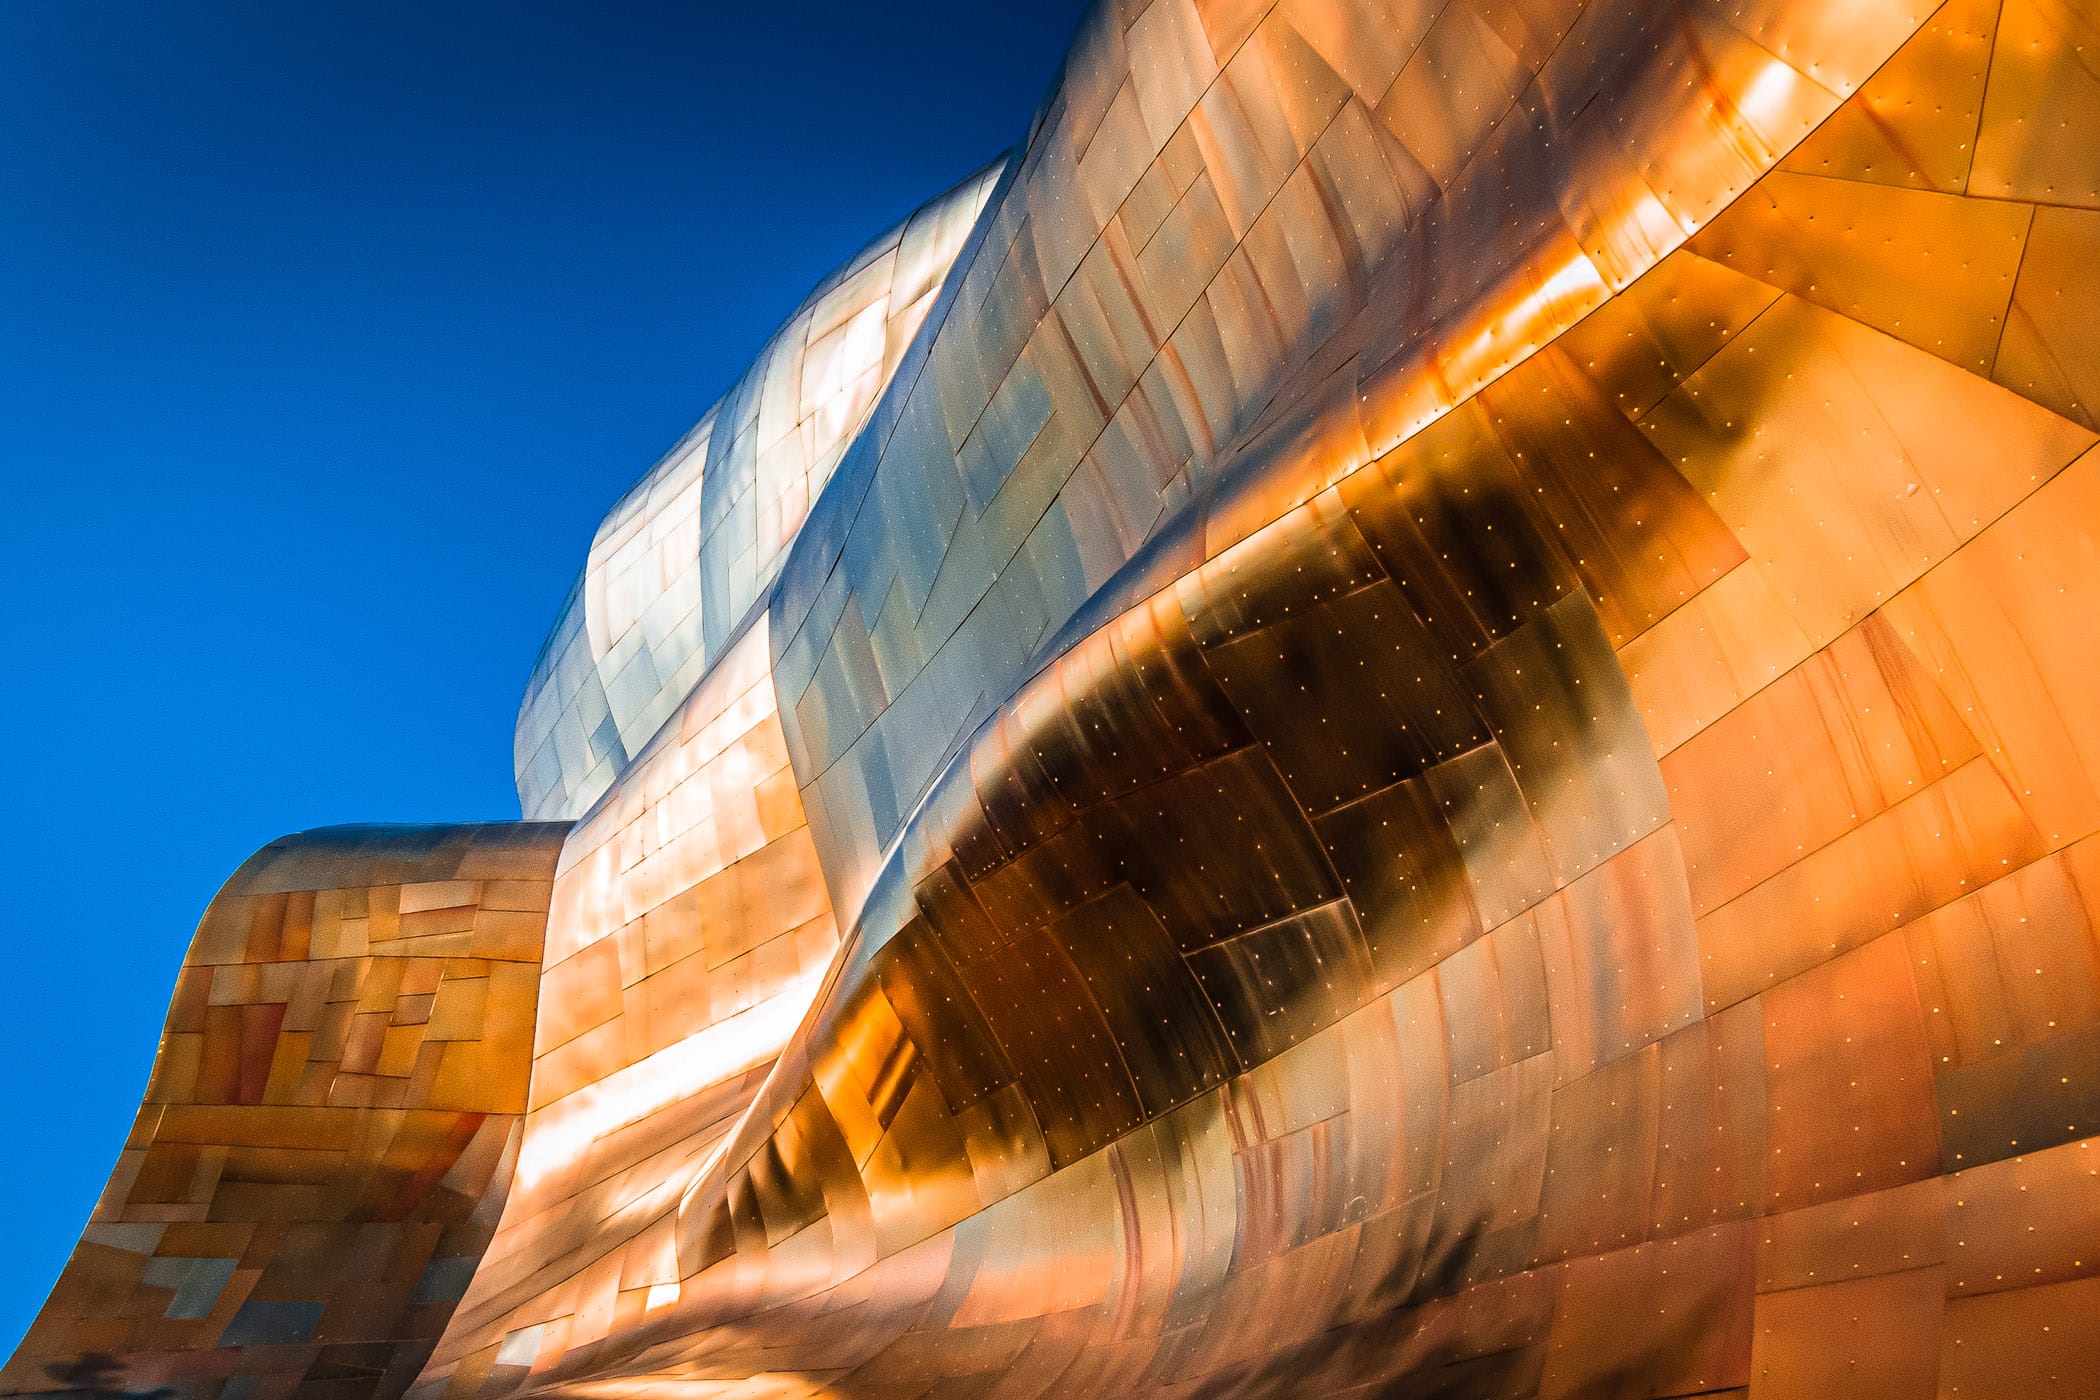 Architectural detail of the Frank Gehry-designed Museum of Pop Culture, Seattle.